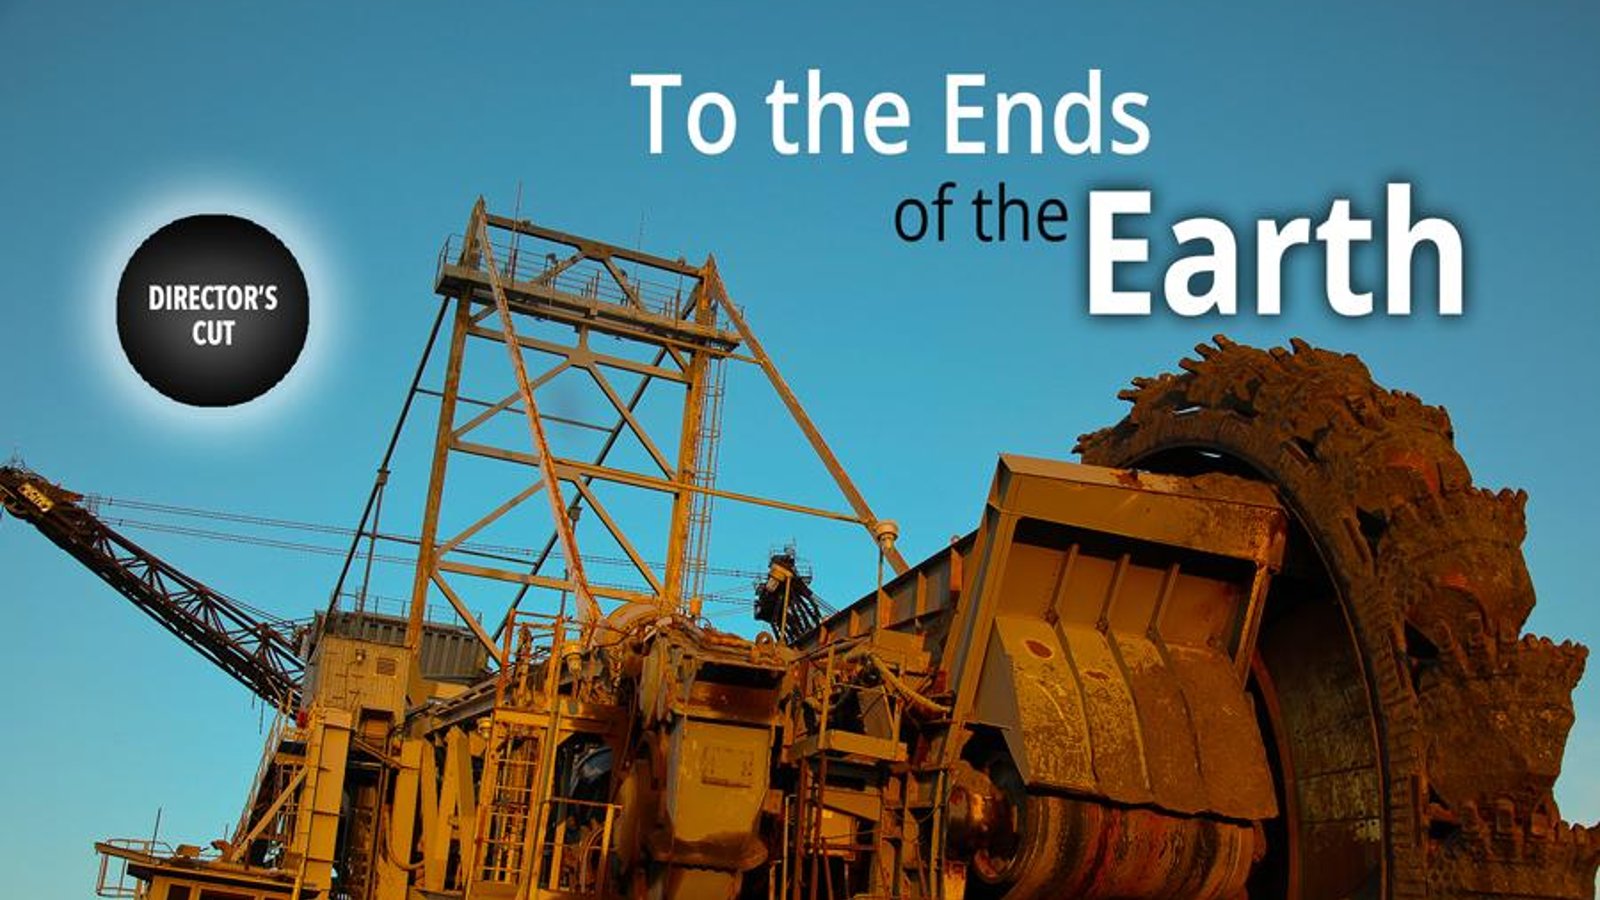 To the Ends of the Earth - The Rise of Extreme Energy